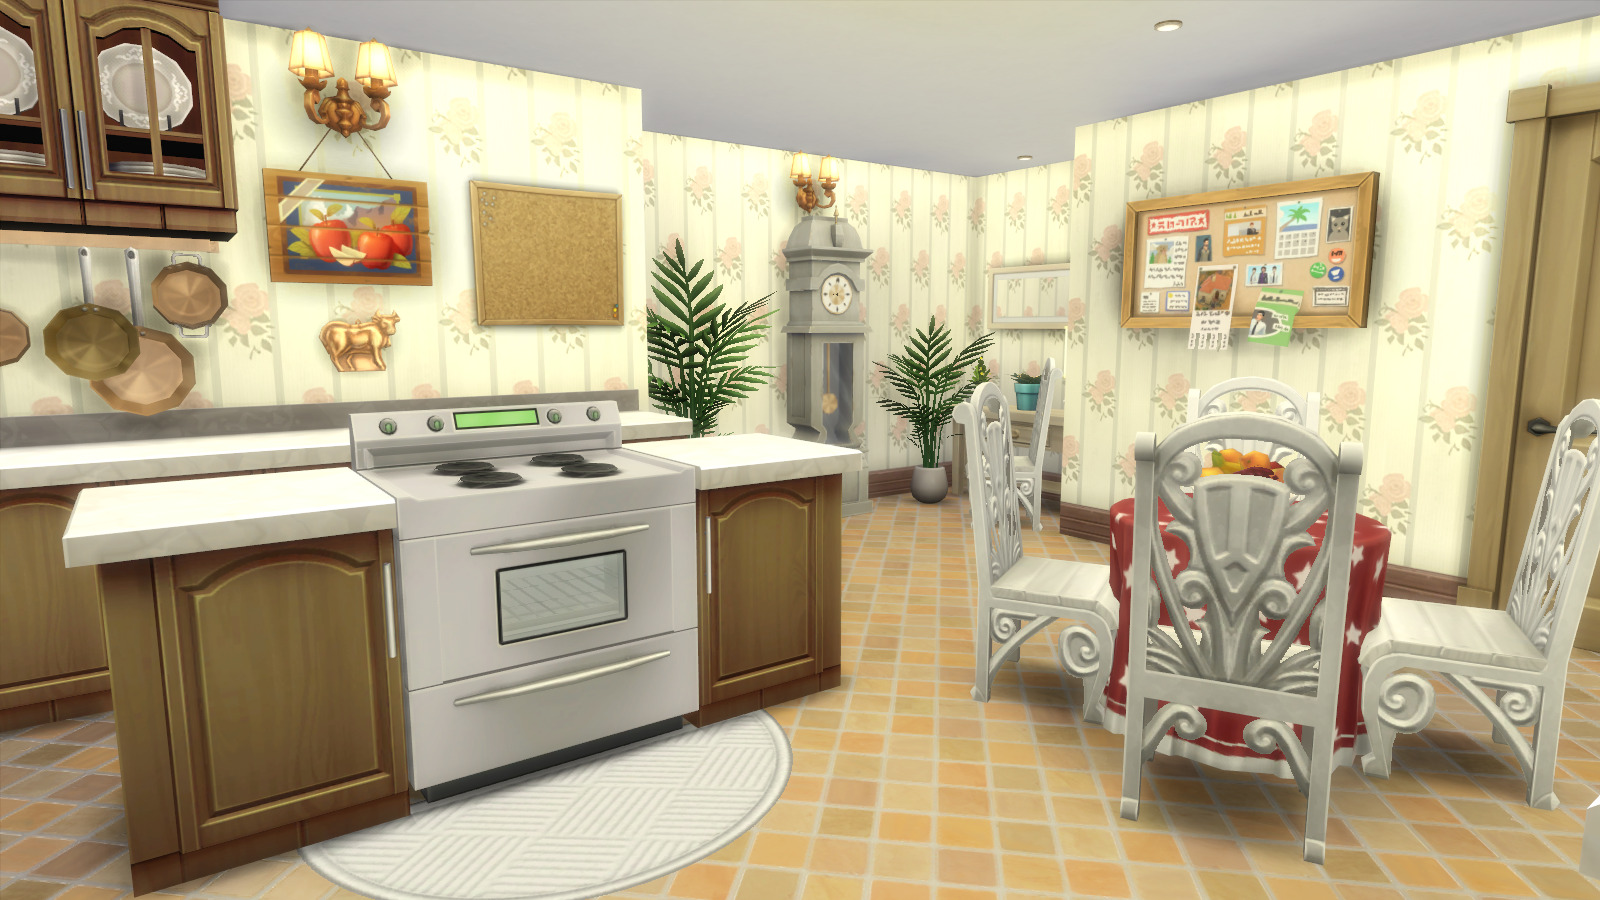 Mod The Sims The Golden Girls House 4 Br 3 5 Ba The Sims 4